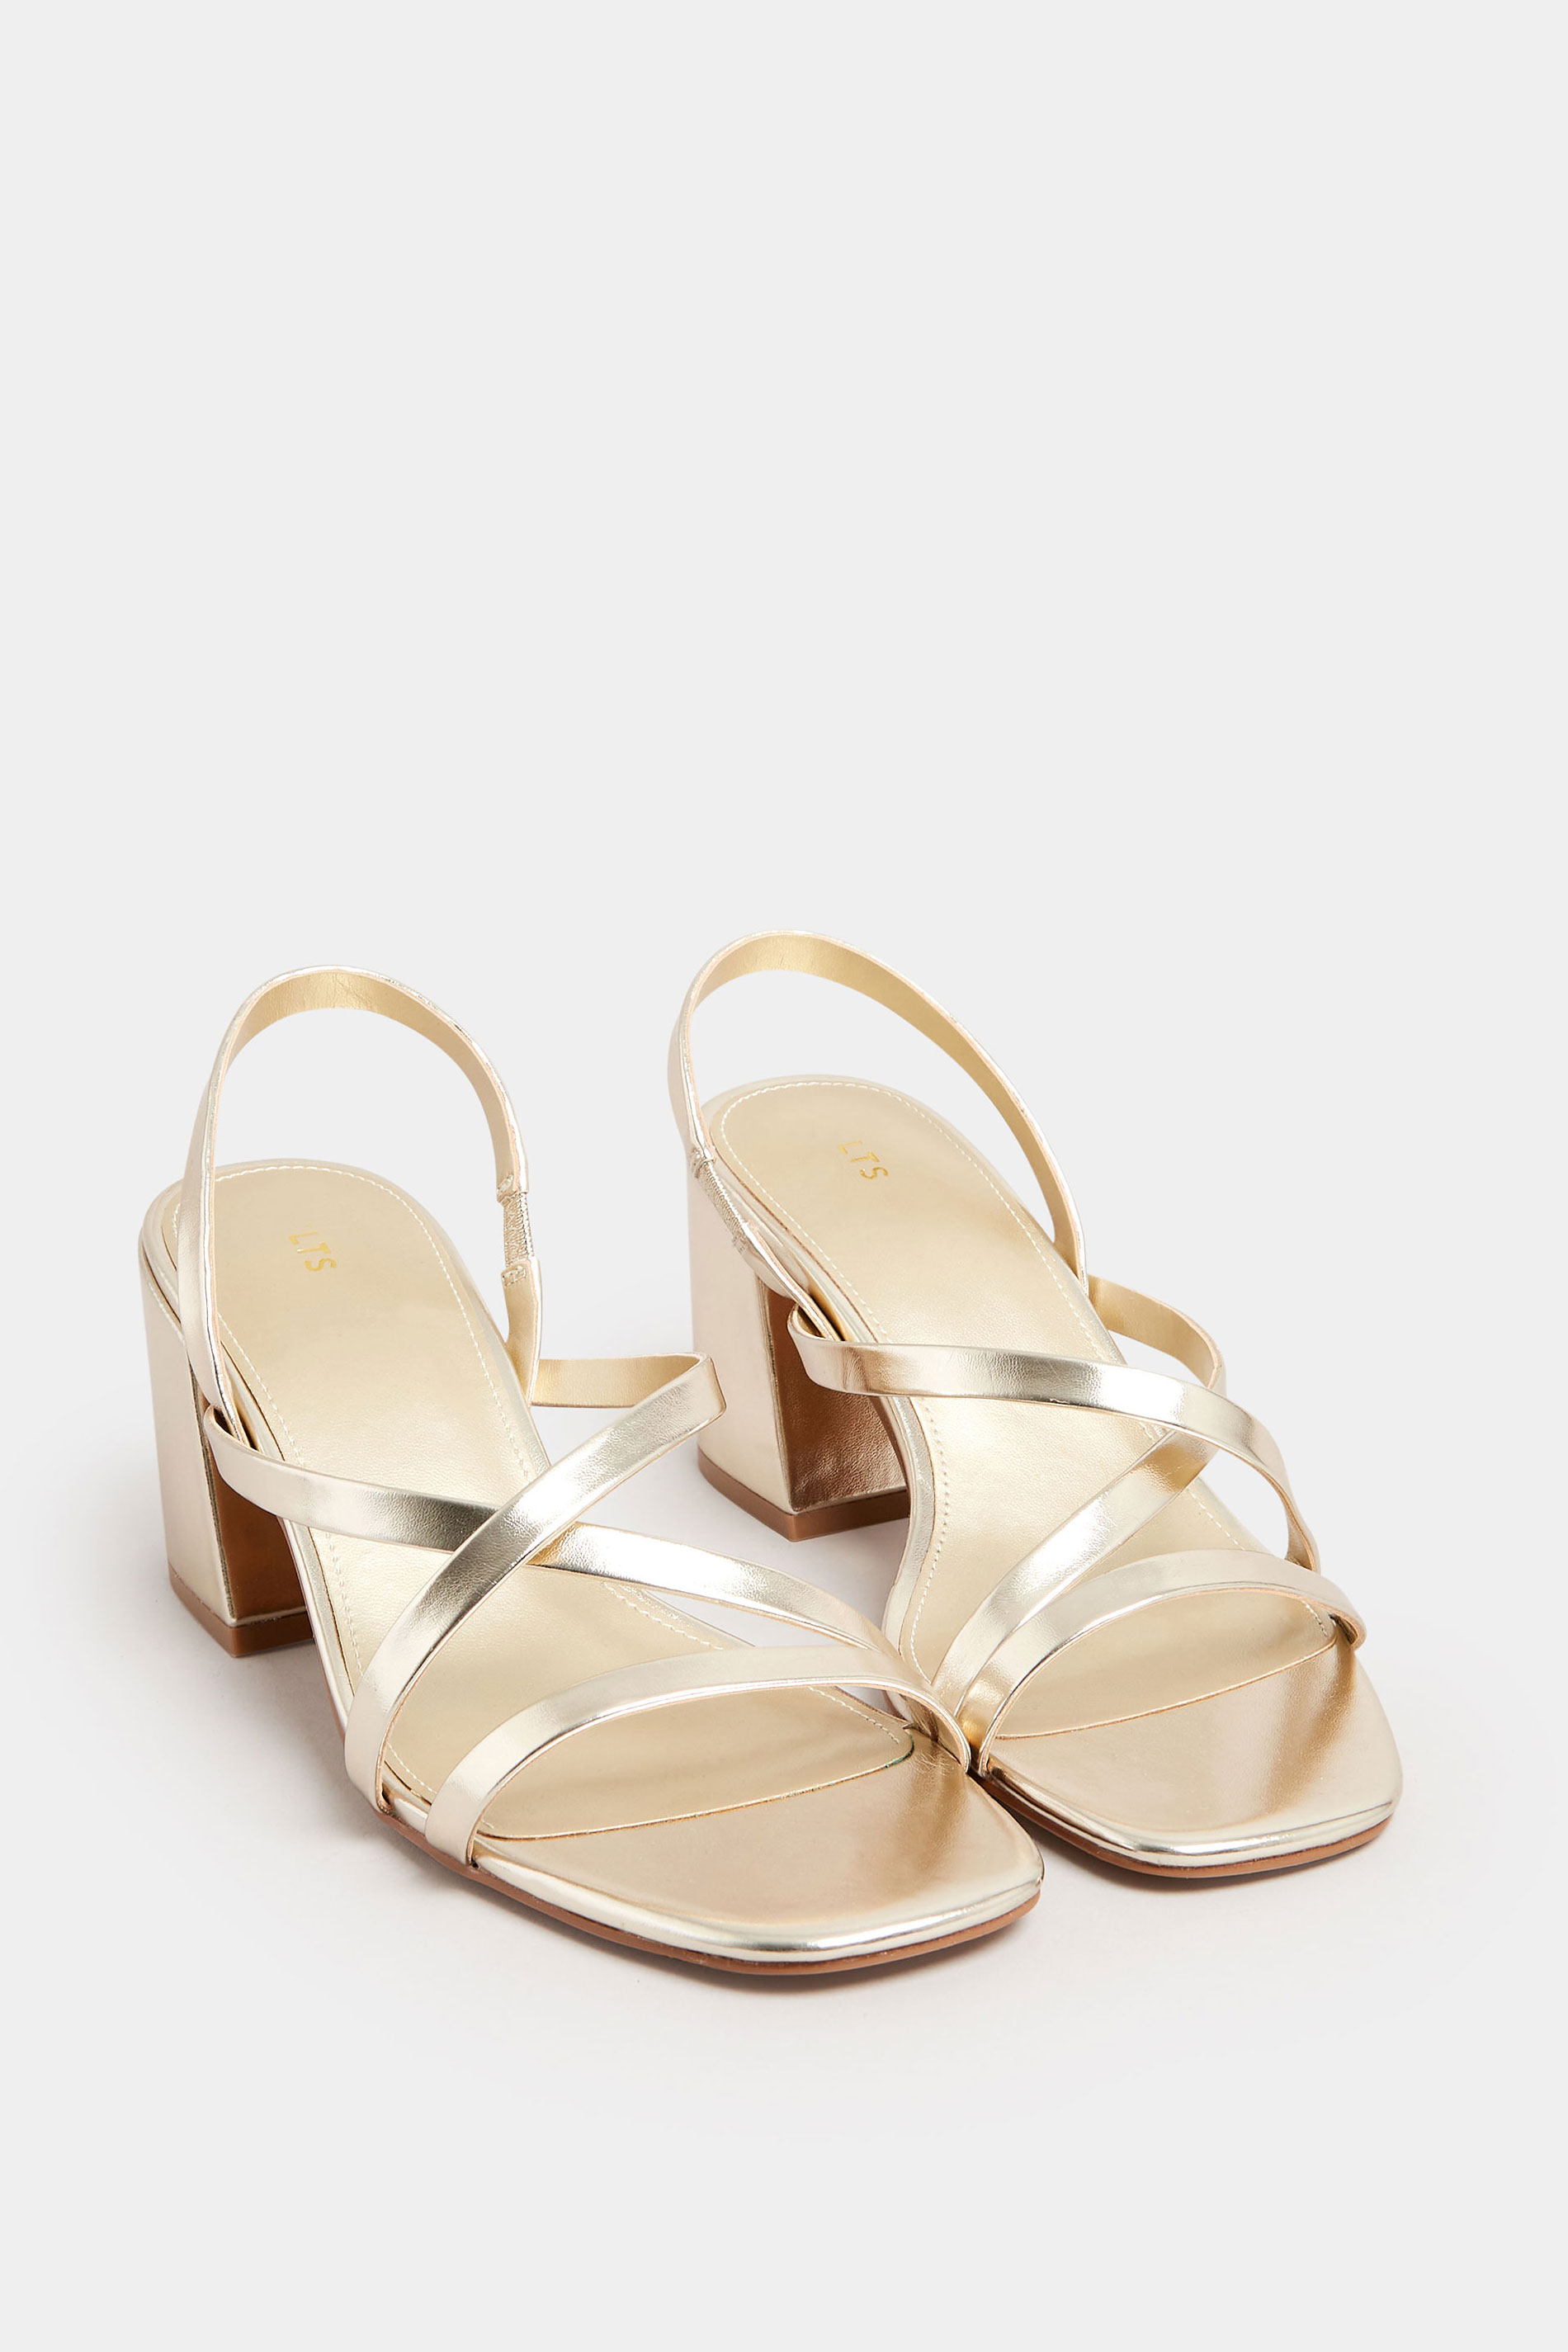 LTS Gold Cross Over Strap Block Heel Sandals In Standard Fit | Long Tall Sally  2